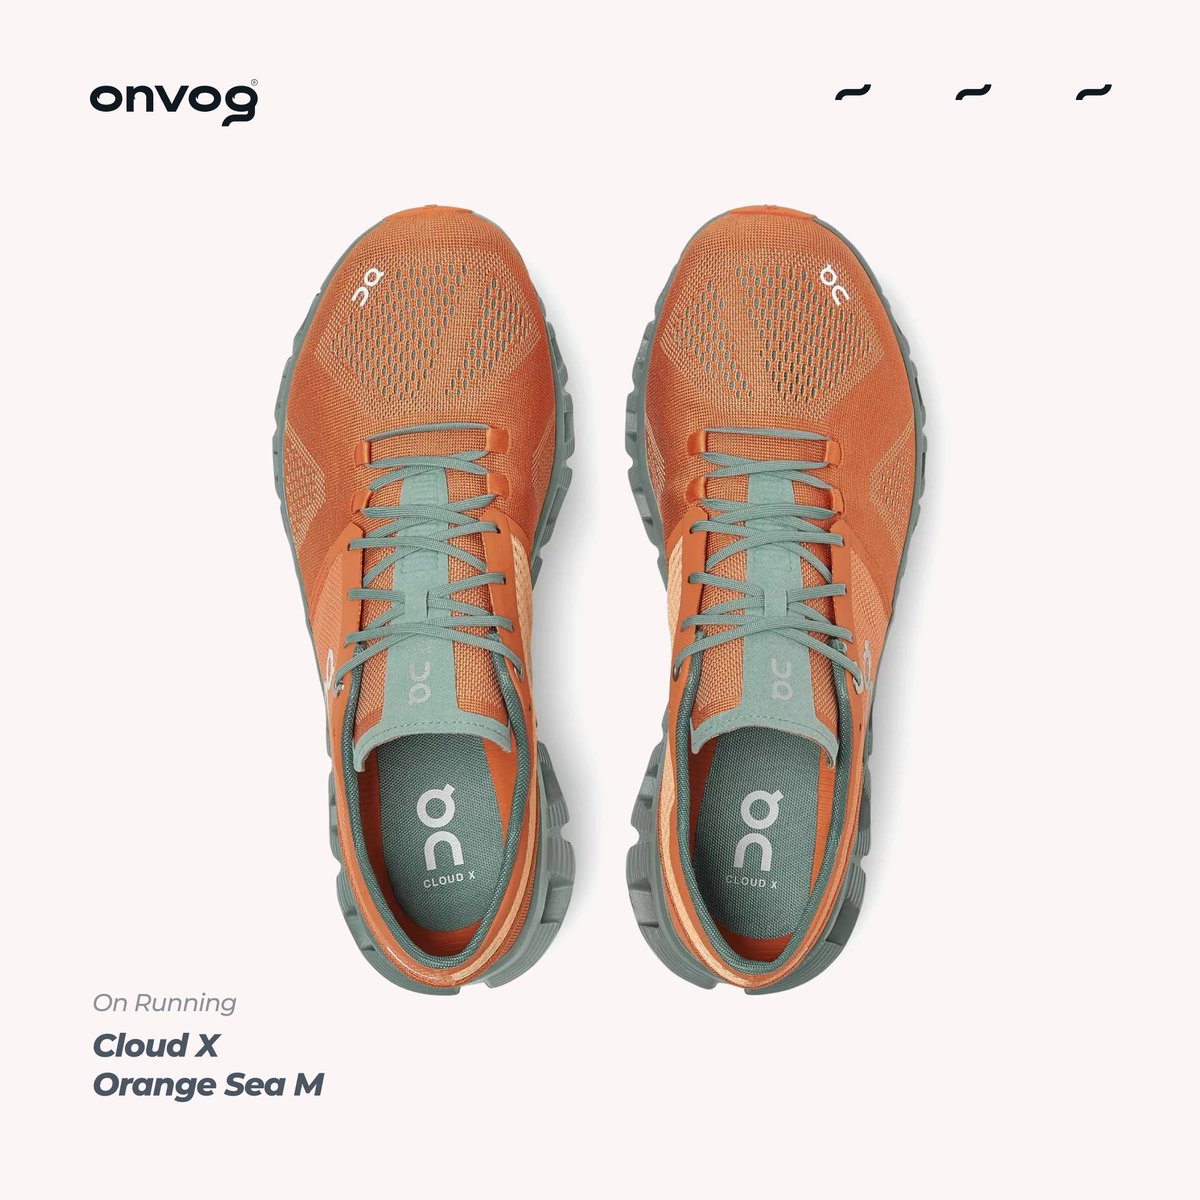 🍊✨ Get ready to make waves in the On Running Cloud X Orange Sea M (SKU: 6280001180039)! 🌊👟 Experience unparalleled comfort and style with these lightweight, responsive kicks.
#OnRunning #CloudX #OrangeSea #RunningShoes #RunnersOfInstagram #InstaRunners #FitnessGoals